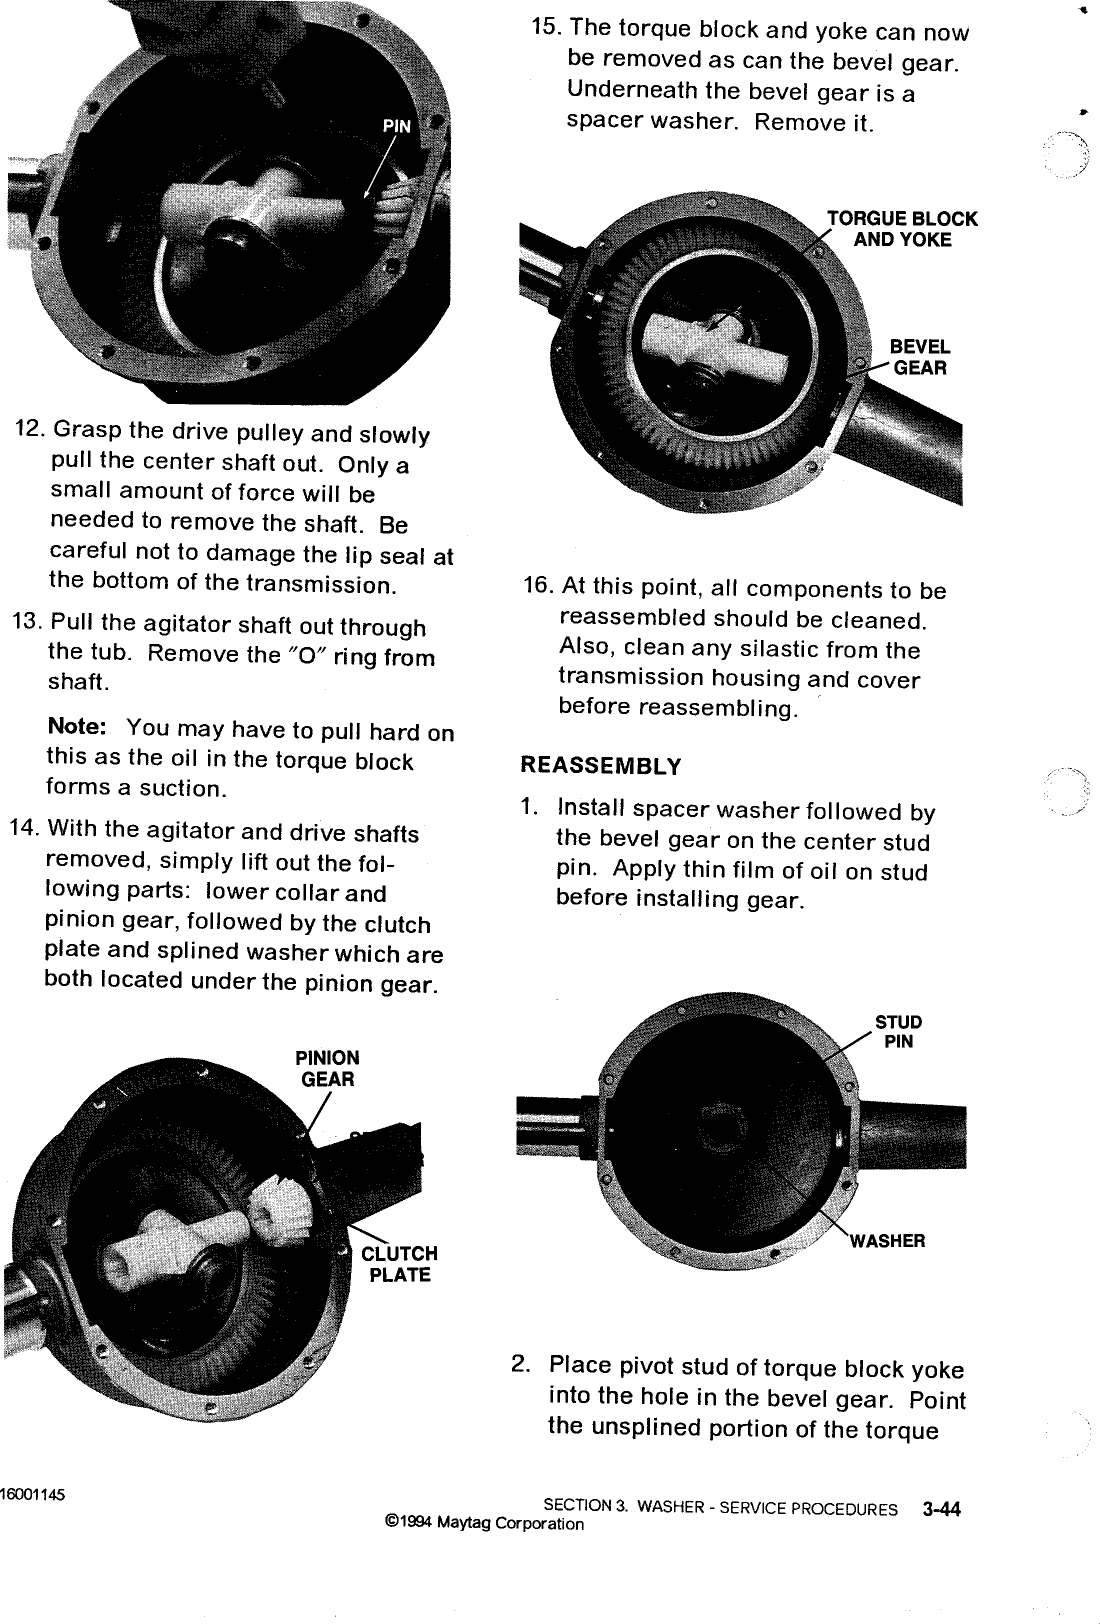 Page 6 of 9 - 16001145  MAYTAG Orbital Trans Prt Of